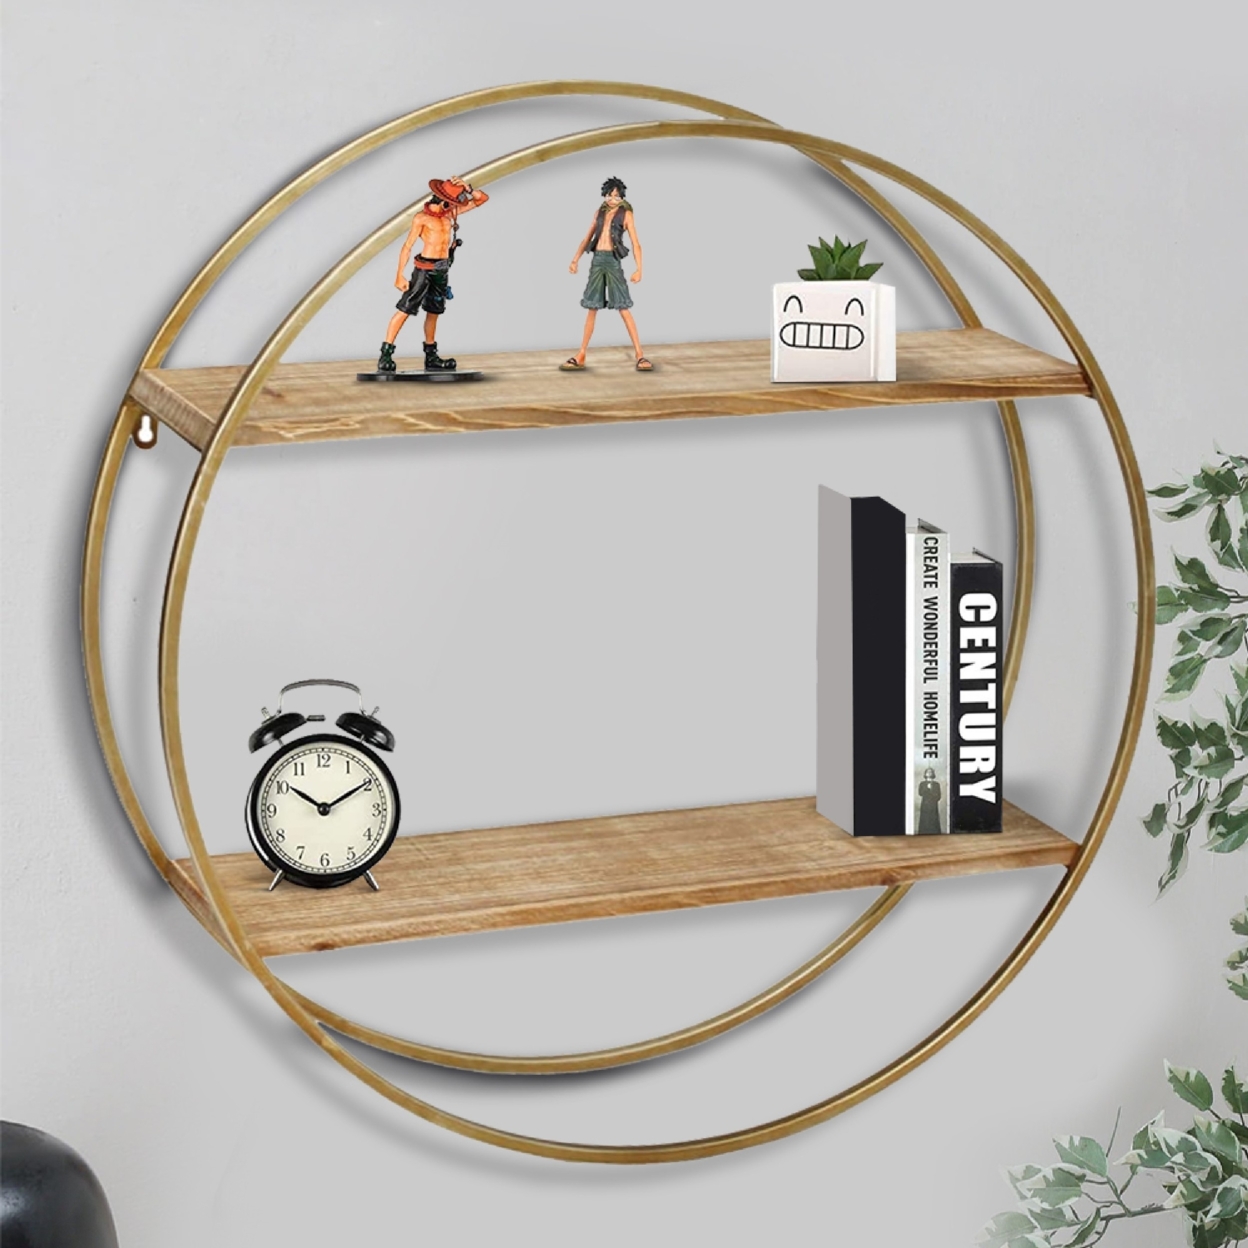 Wood And Metal Wall Shelf With 2 Open Shelves, Brown And Gold- Saltoro Sherpi